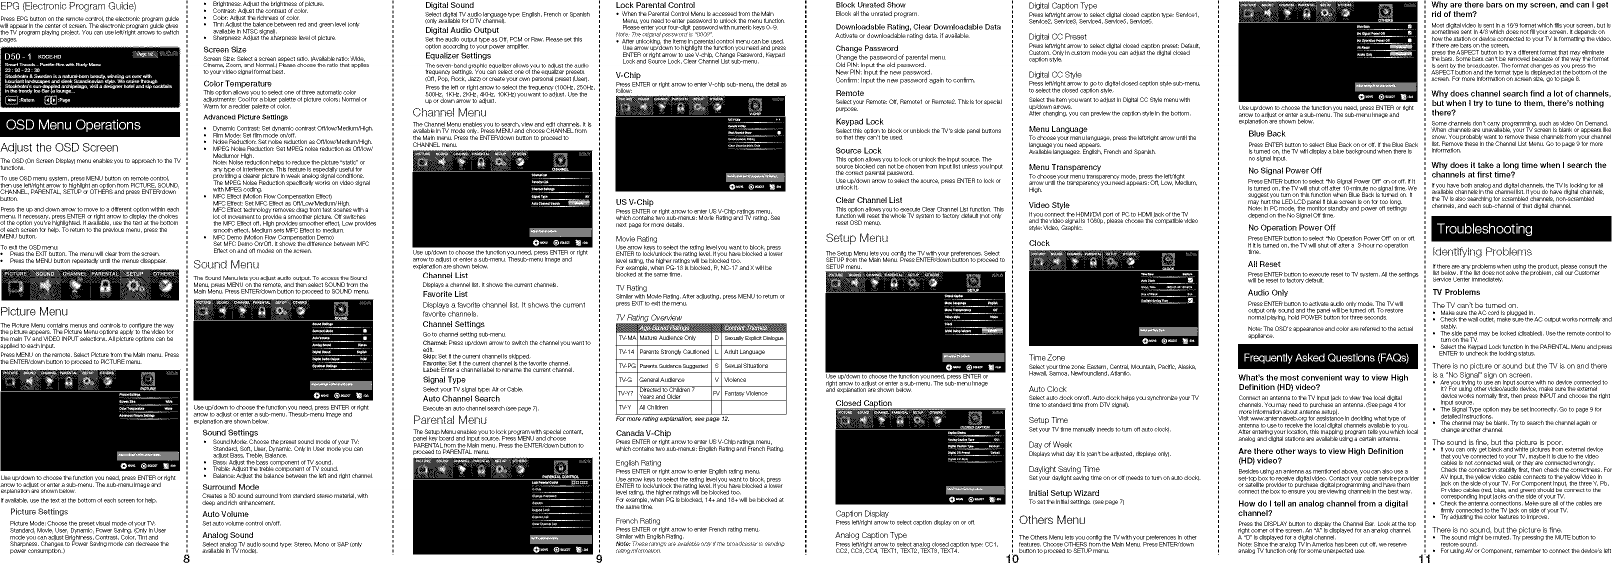 Page 3 of 4 - RCA LED60B55R120Q User Manual  LED TV - Manuals And Guides 1307131L